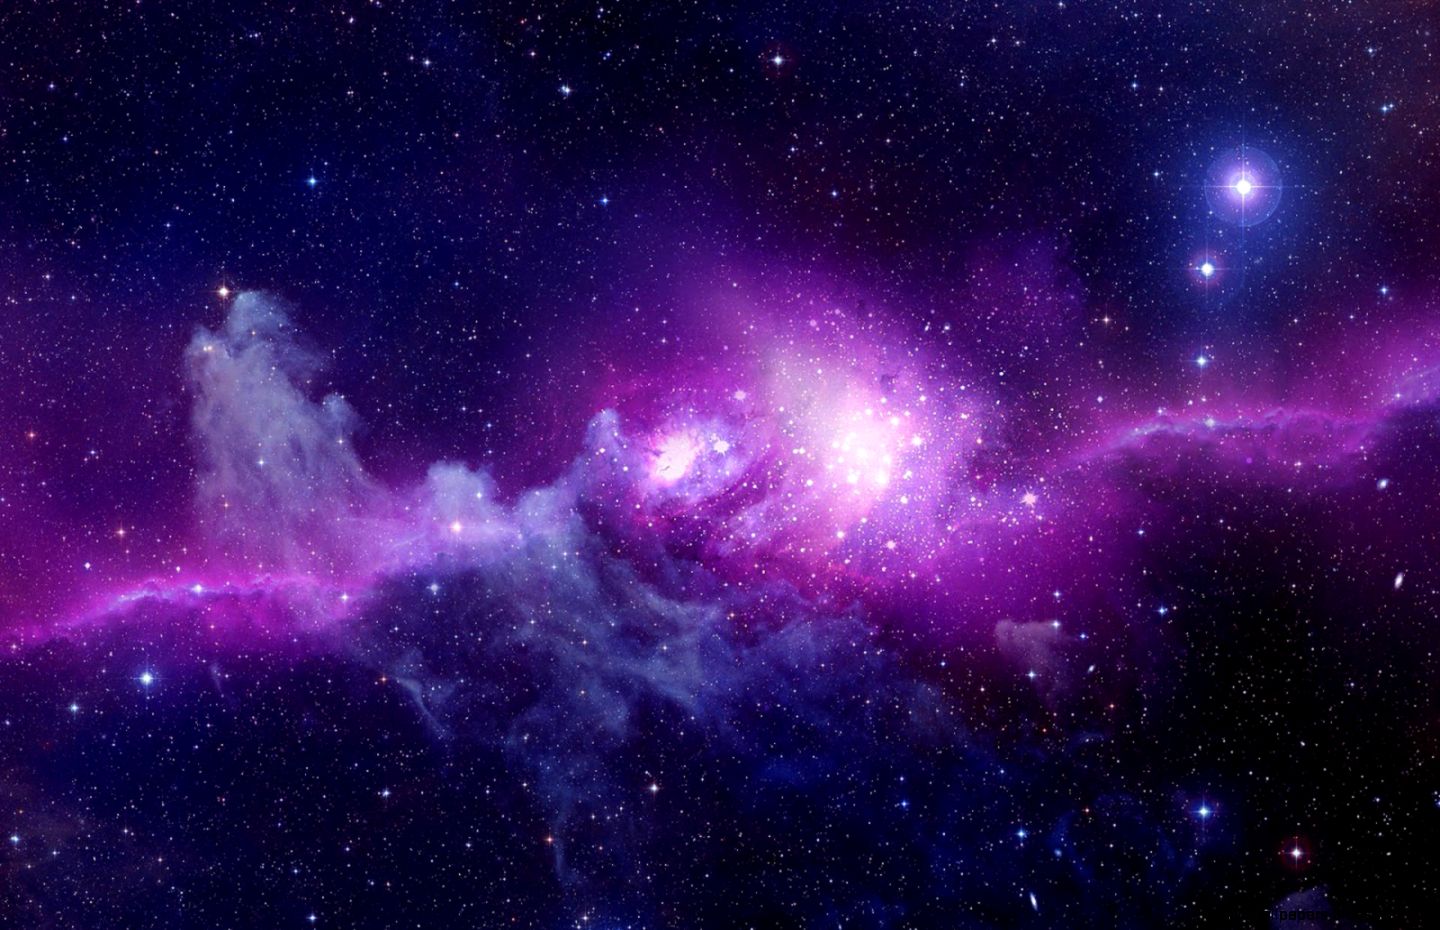  Galaxy  Wallpaper  For Windows  7 Zoom Wallpapers 